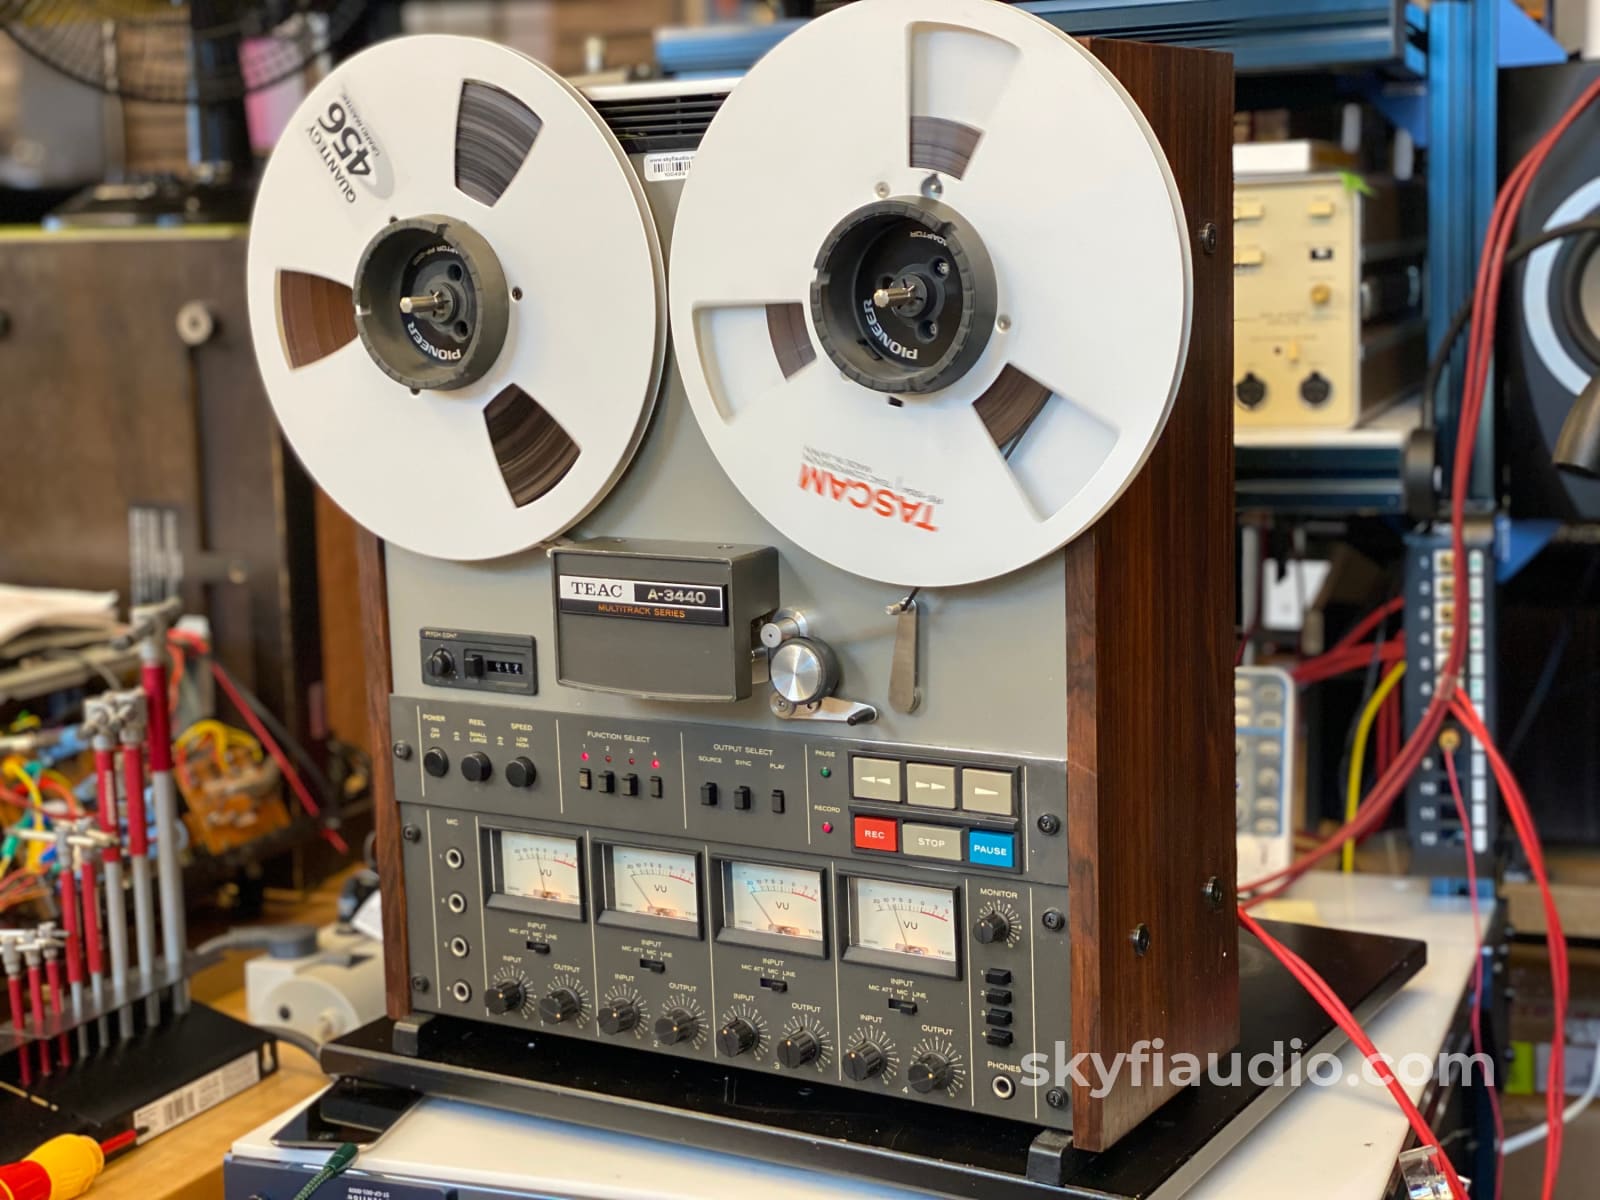 Teac A-3440 4-Channel Reel To Player/Recorder Tape Deck